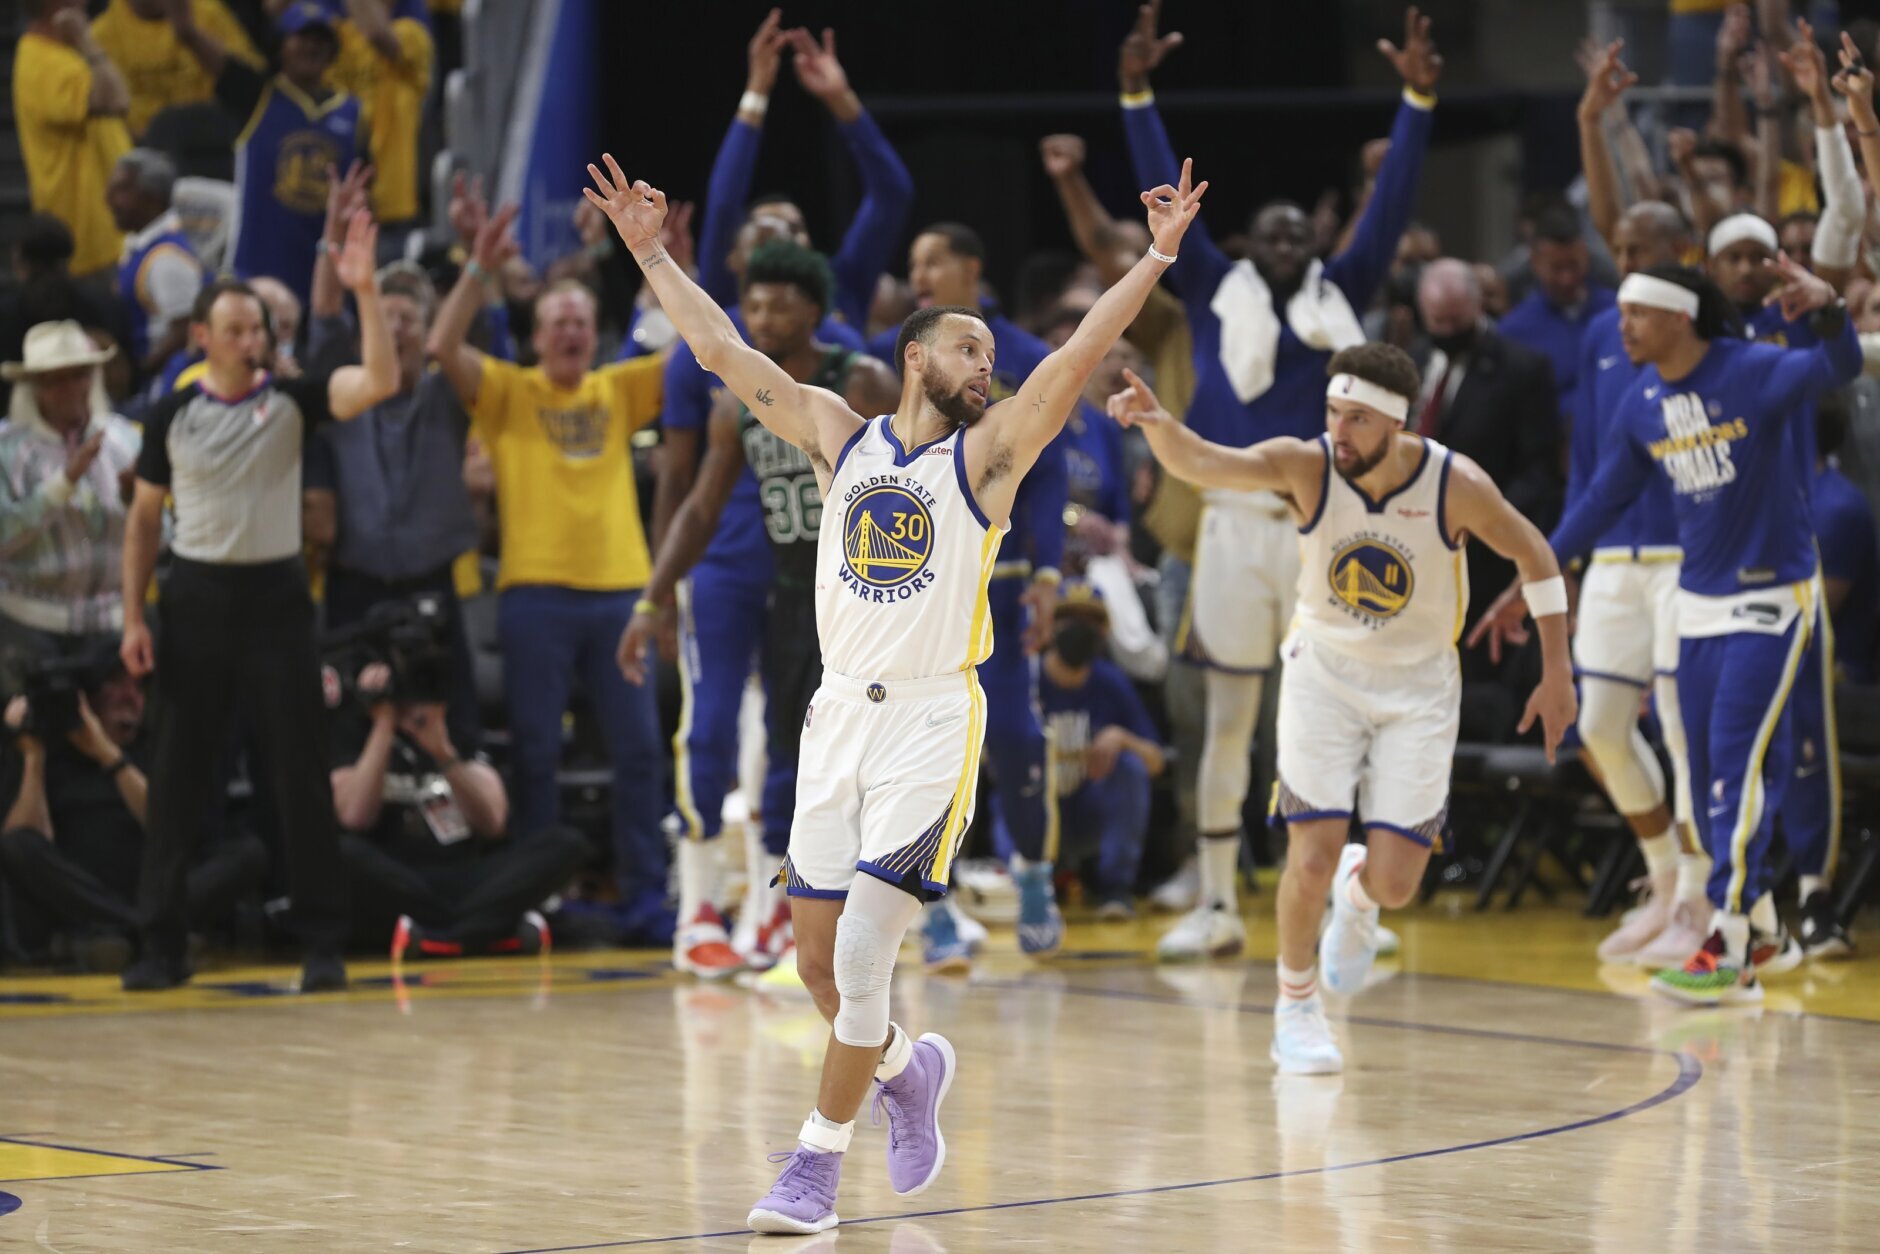 Steph Curry captures first career game-winning buzzer-beater